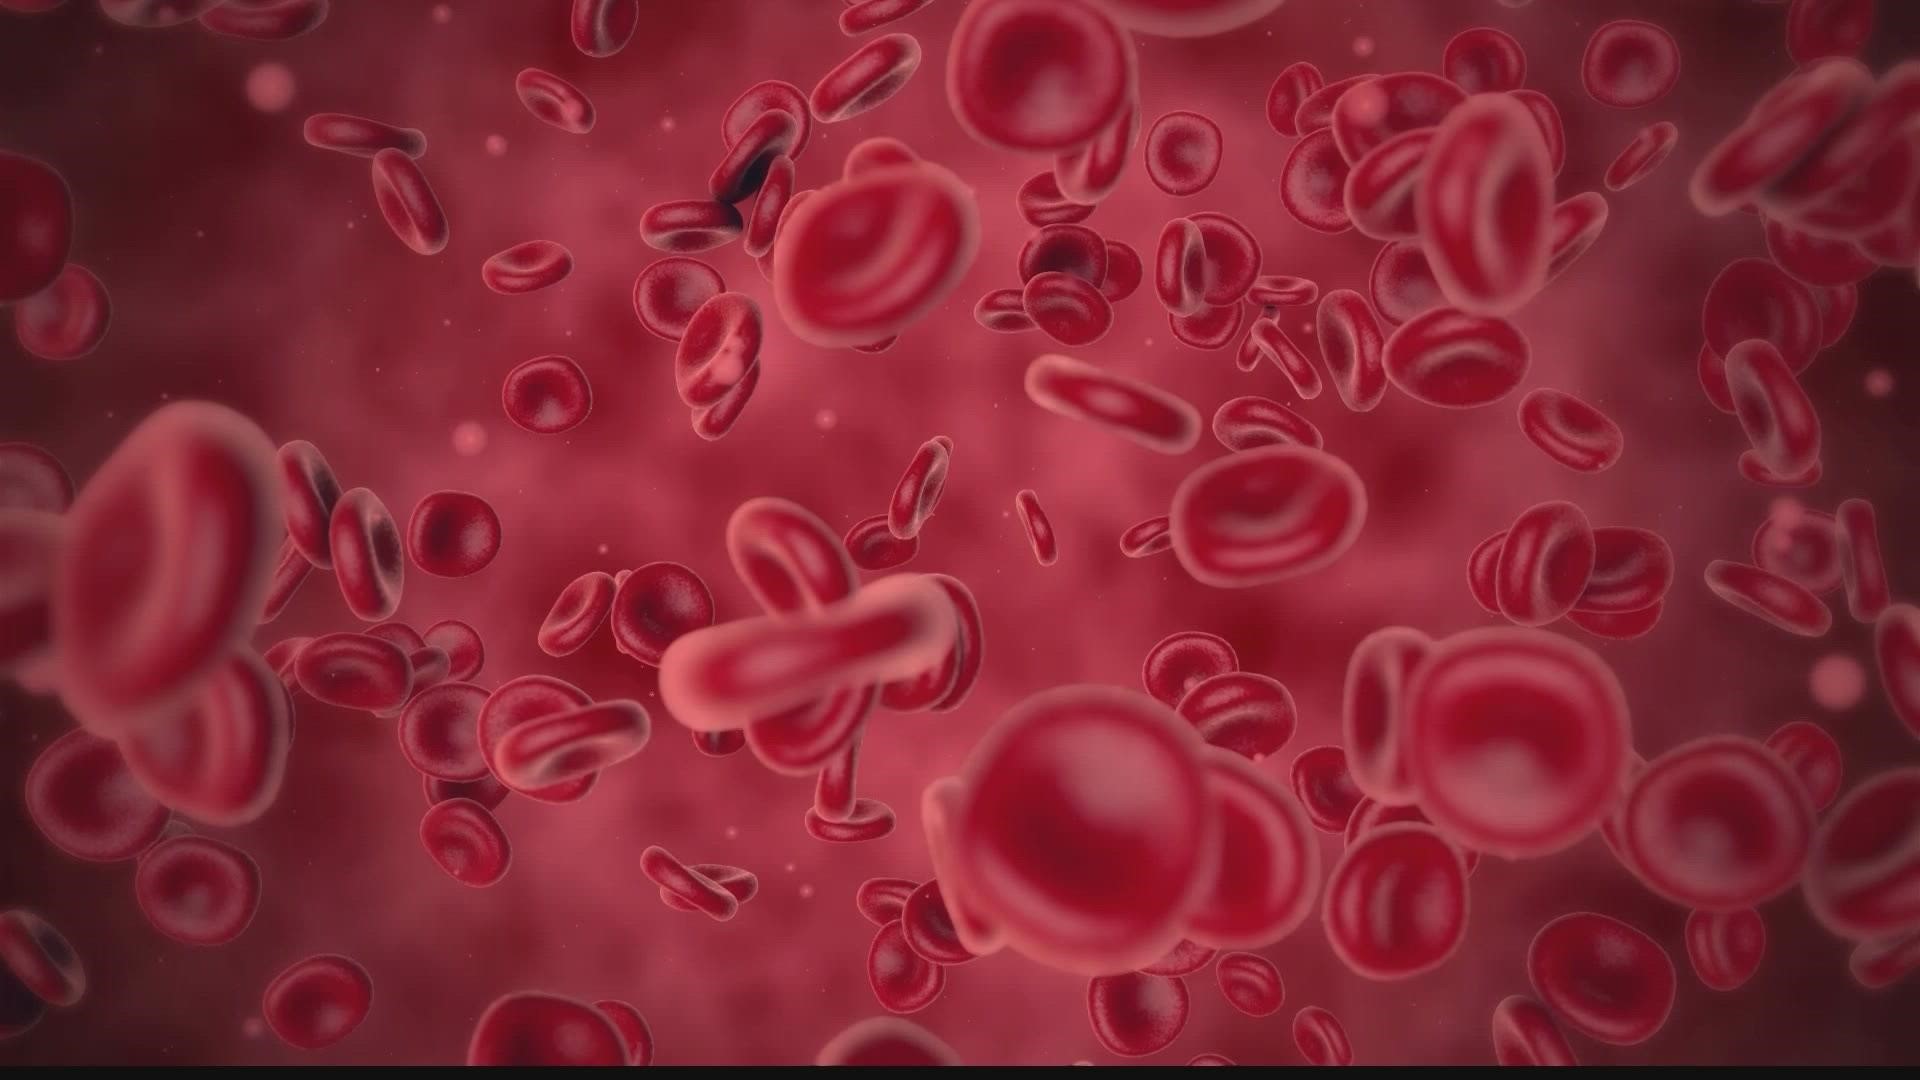 September is Sickle Cell Awareness Month. Here's how the black community can help.